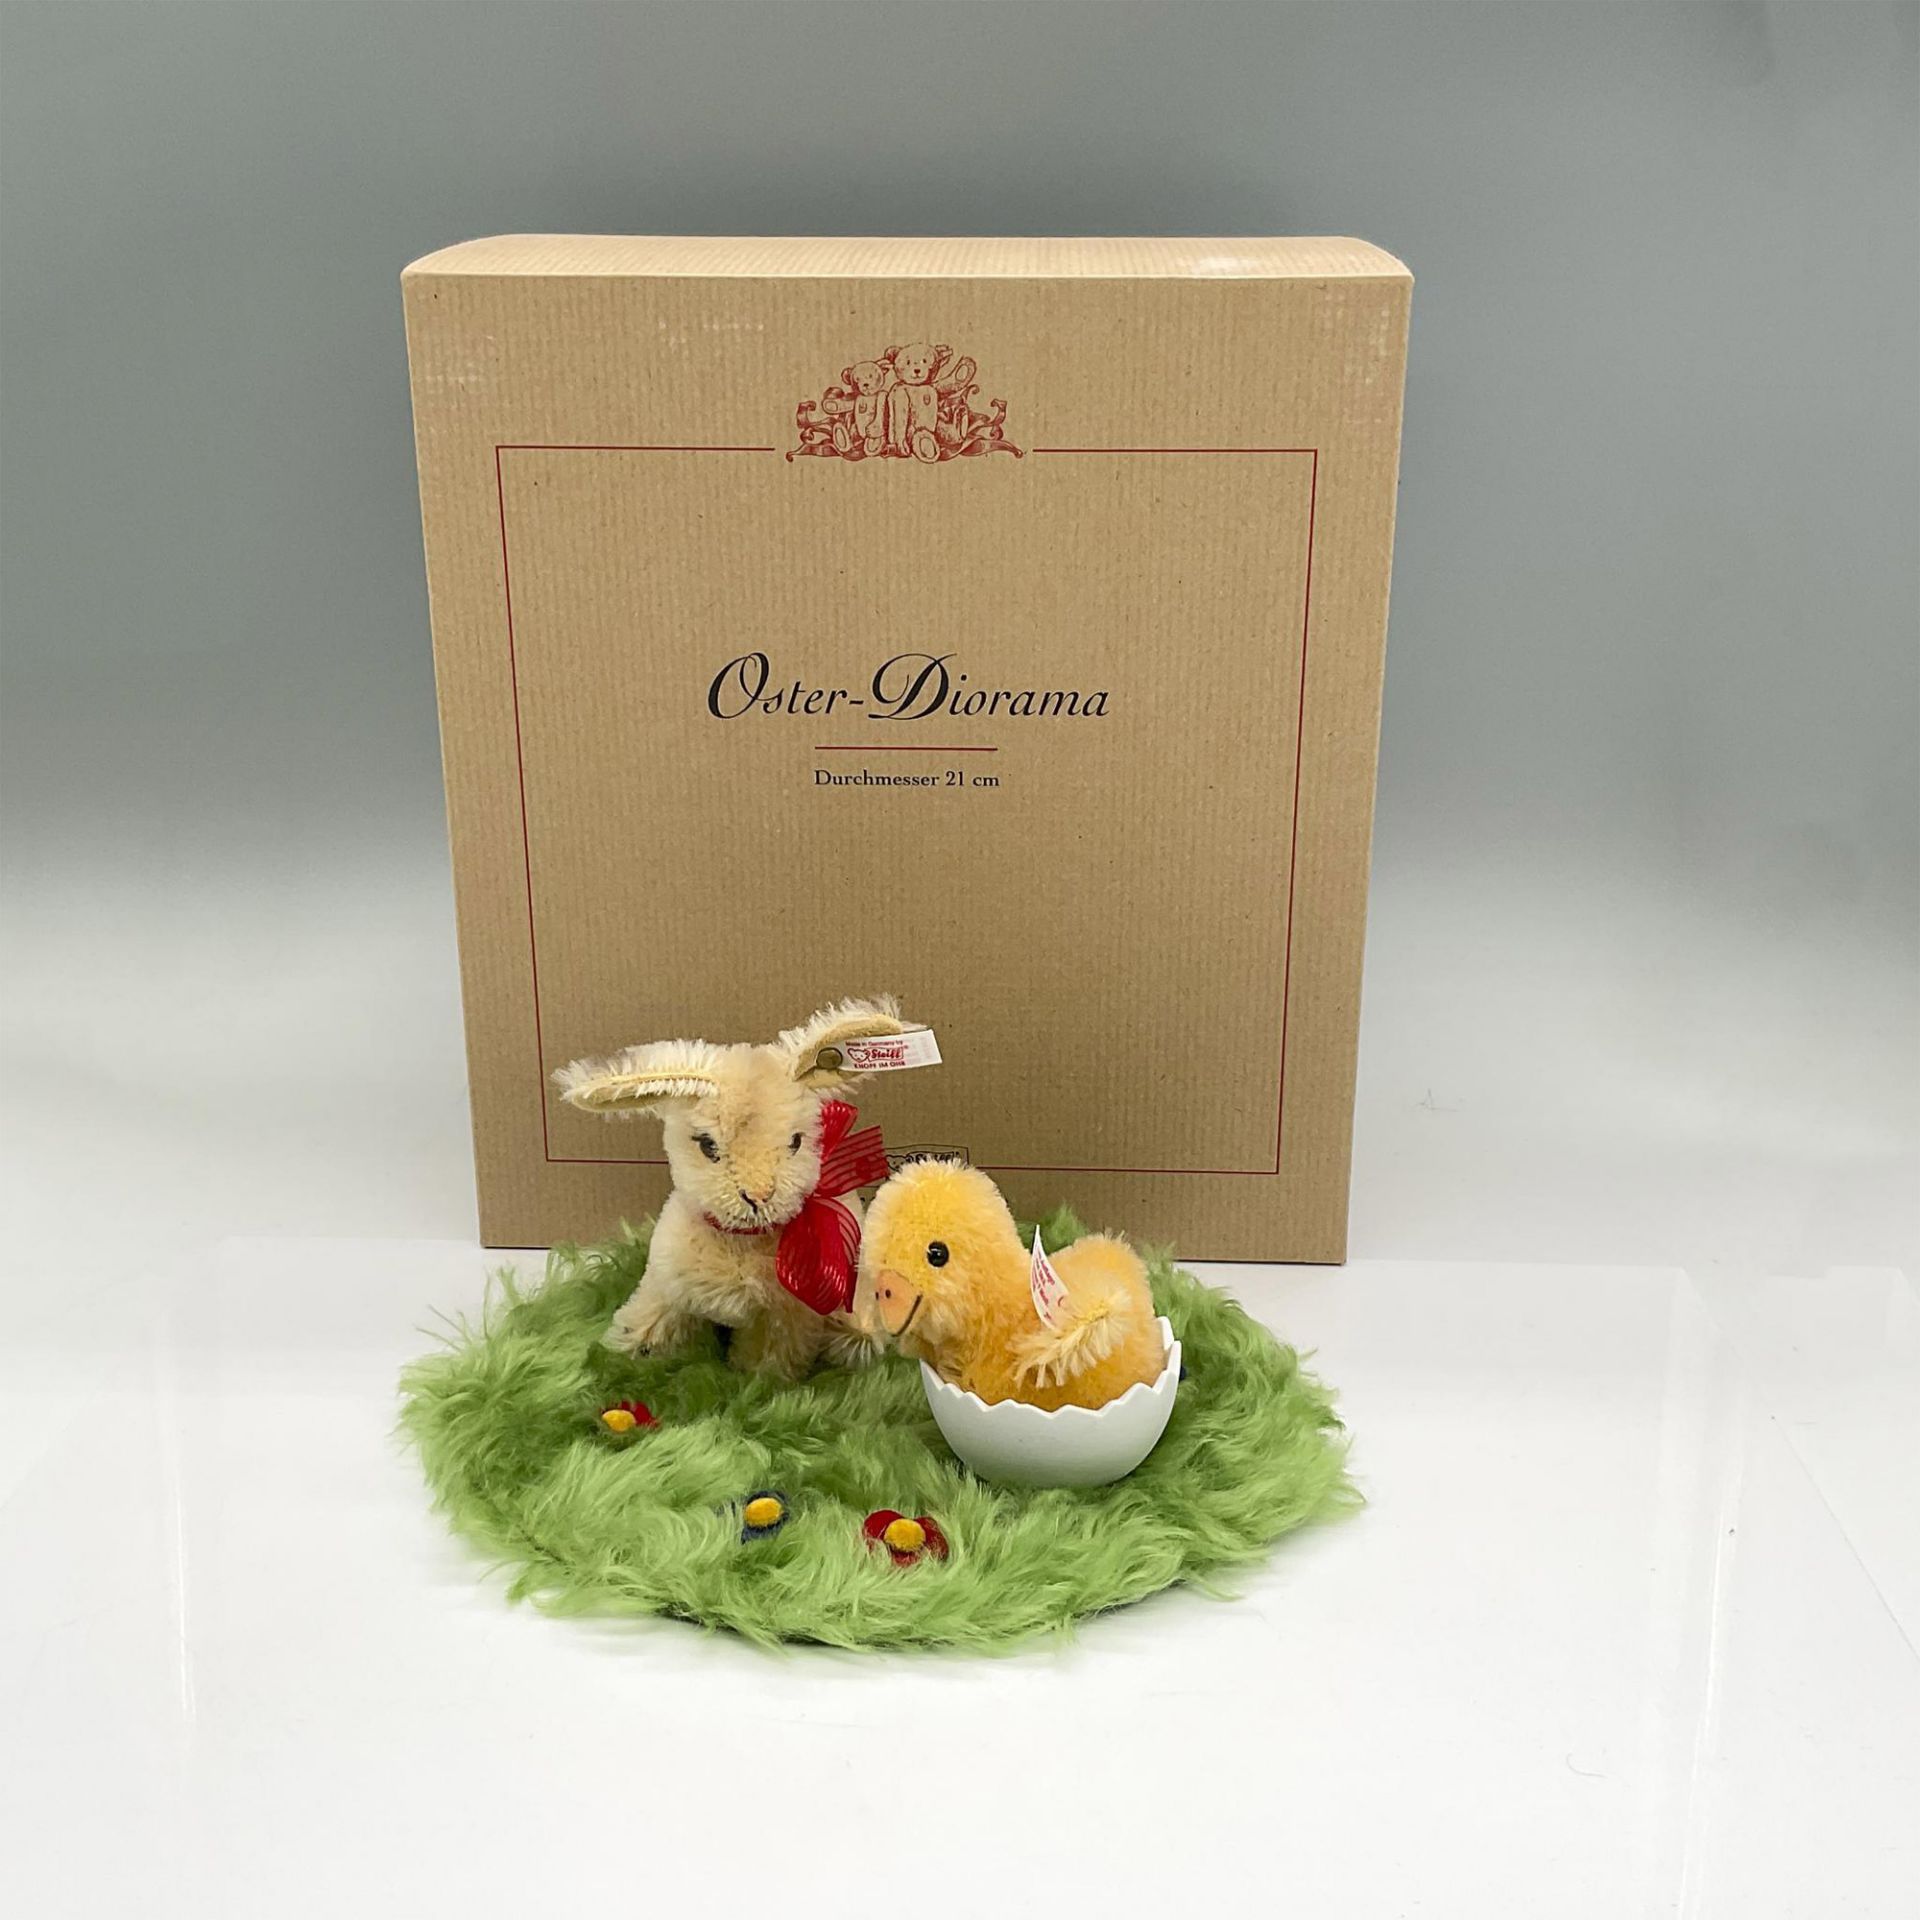 Steiff Mohair Figures, Easter Diorama of Bunny and Chick - Bild 5 aus 5